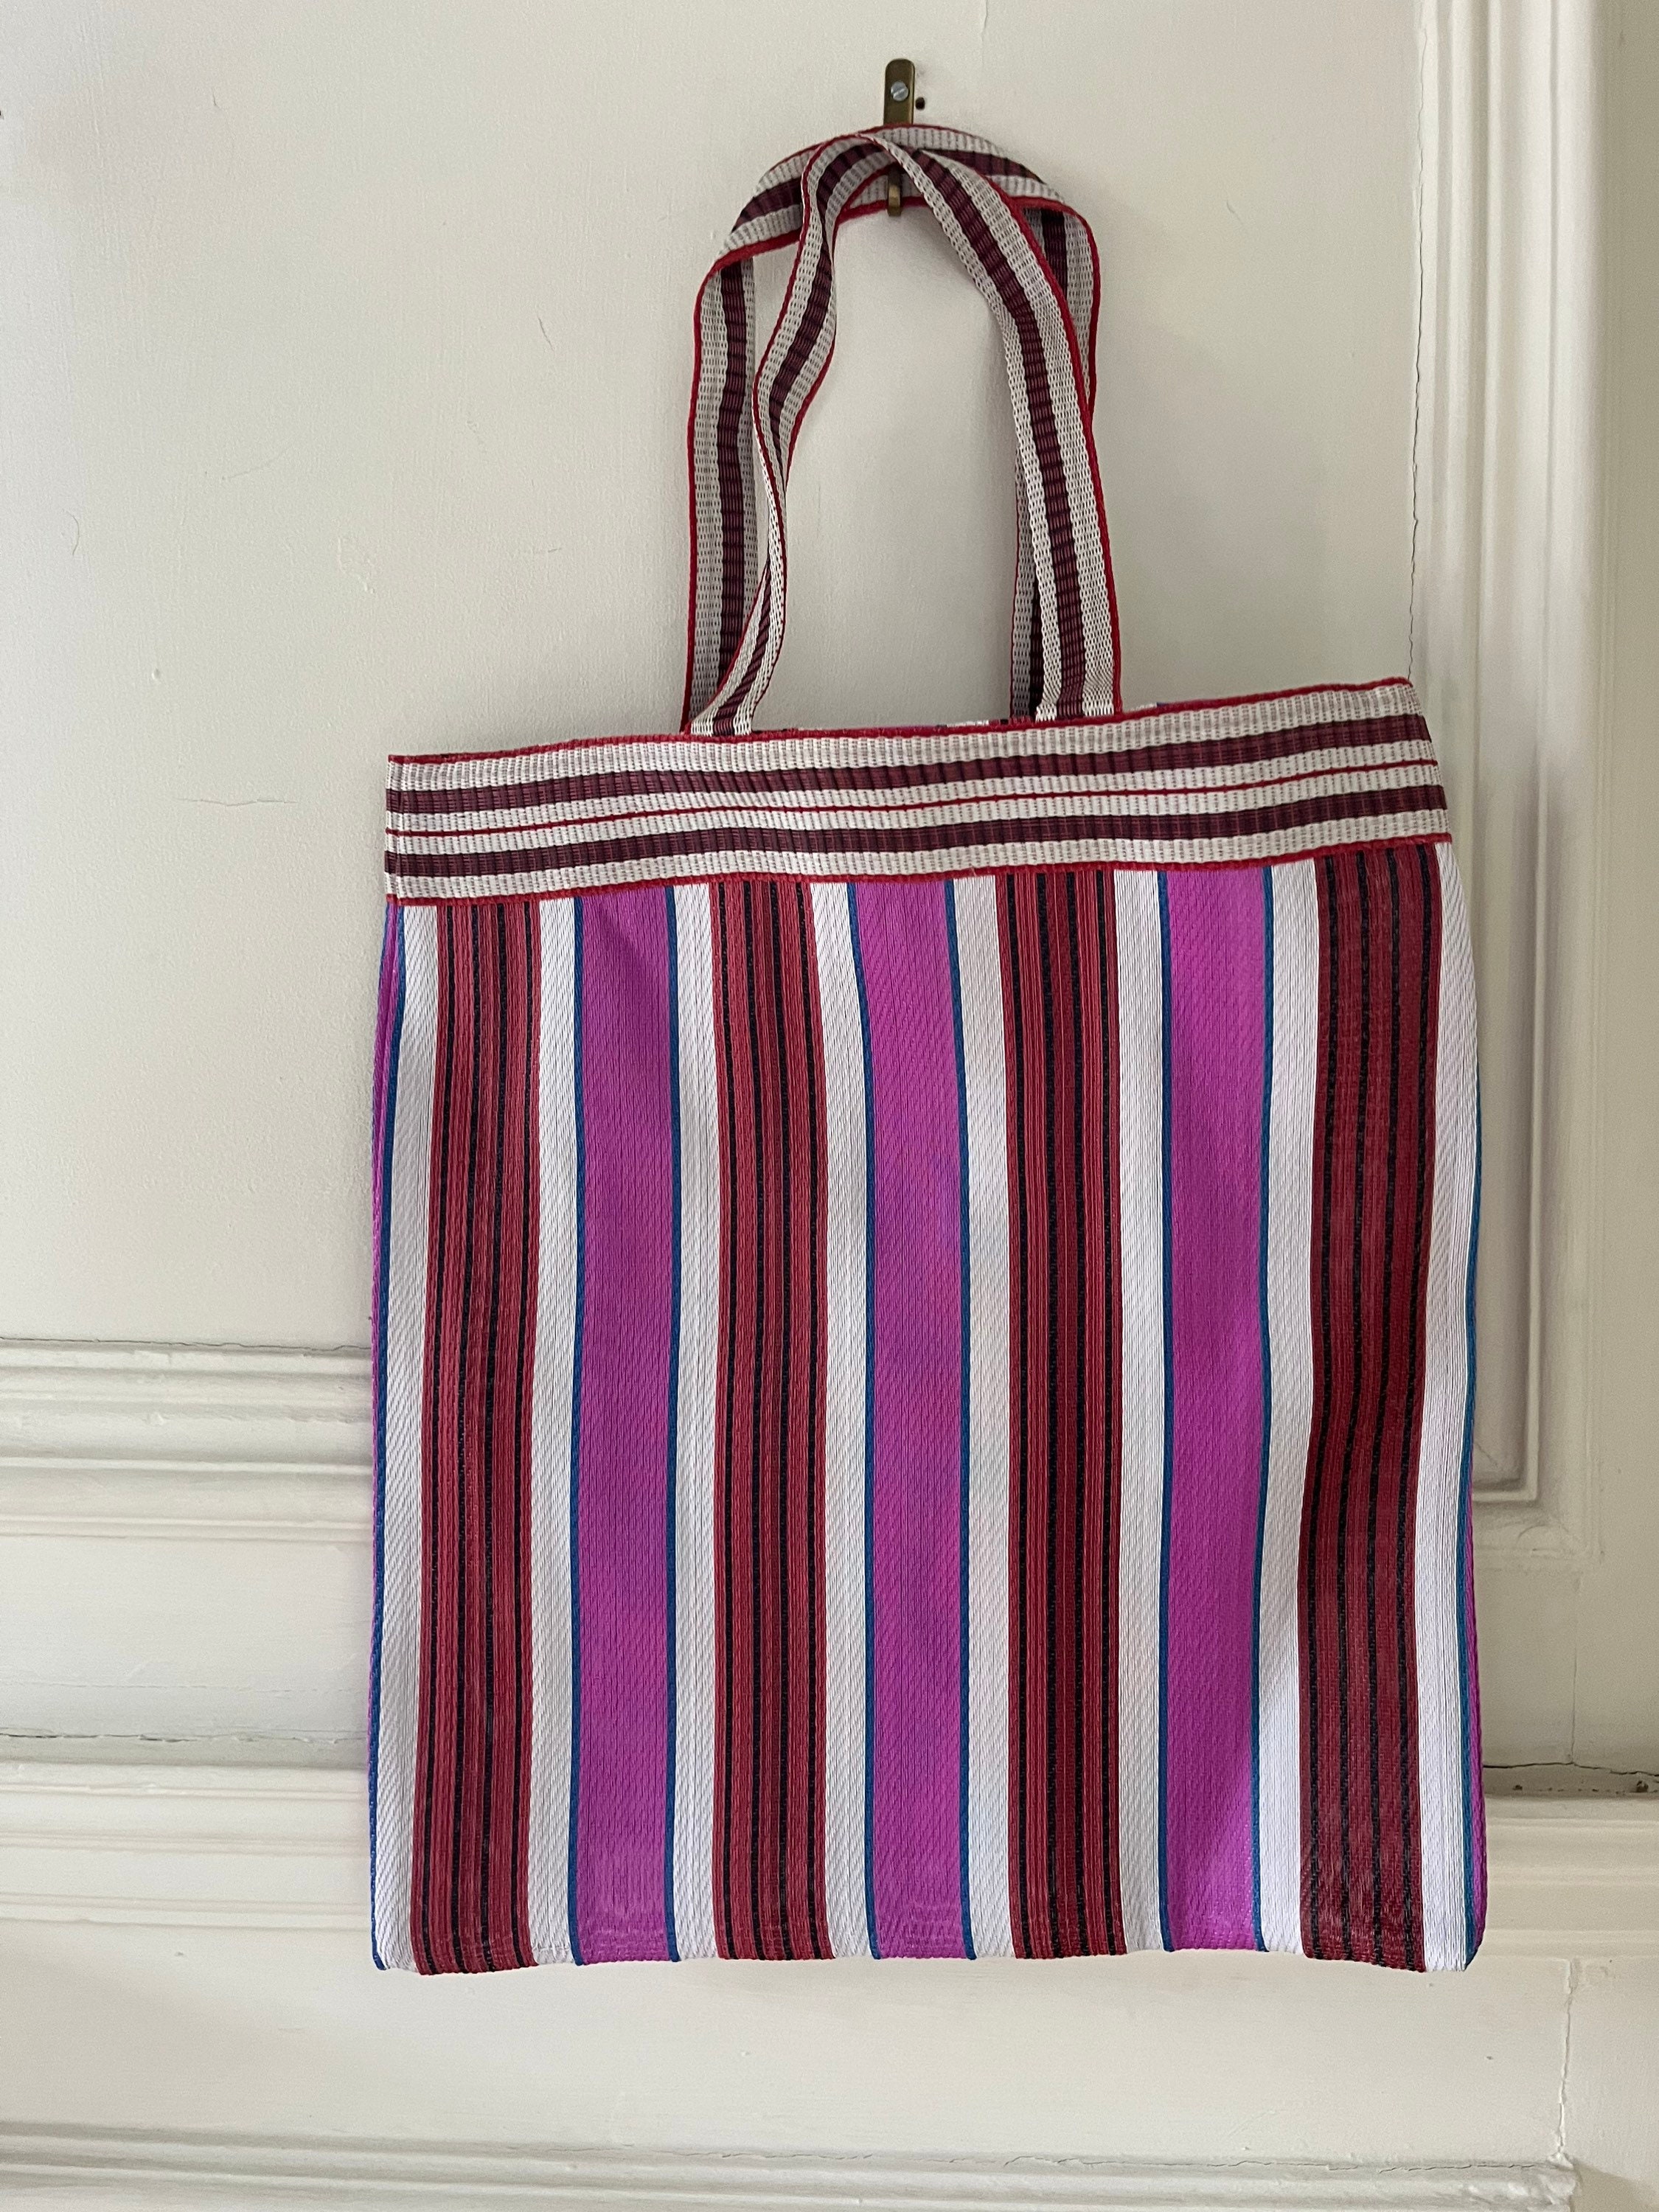 Recycled Plastic Stripe Market Bag From India